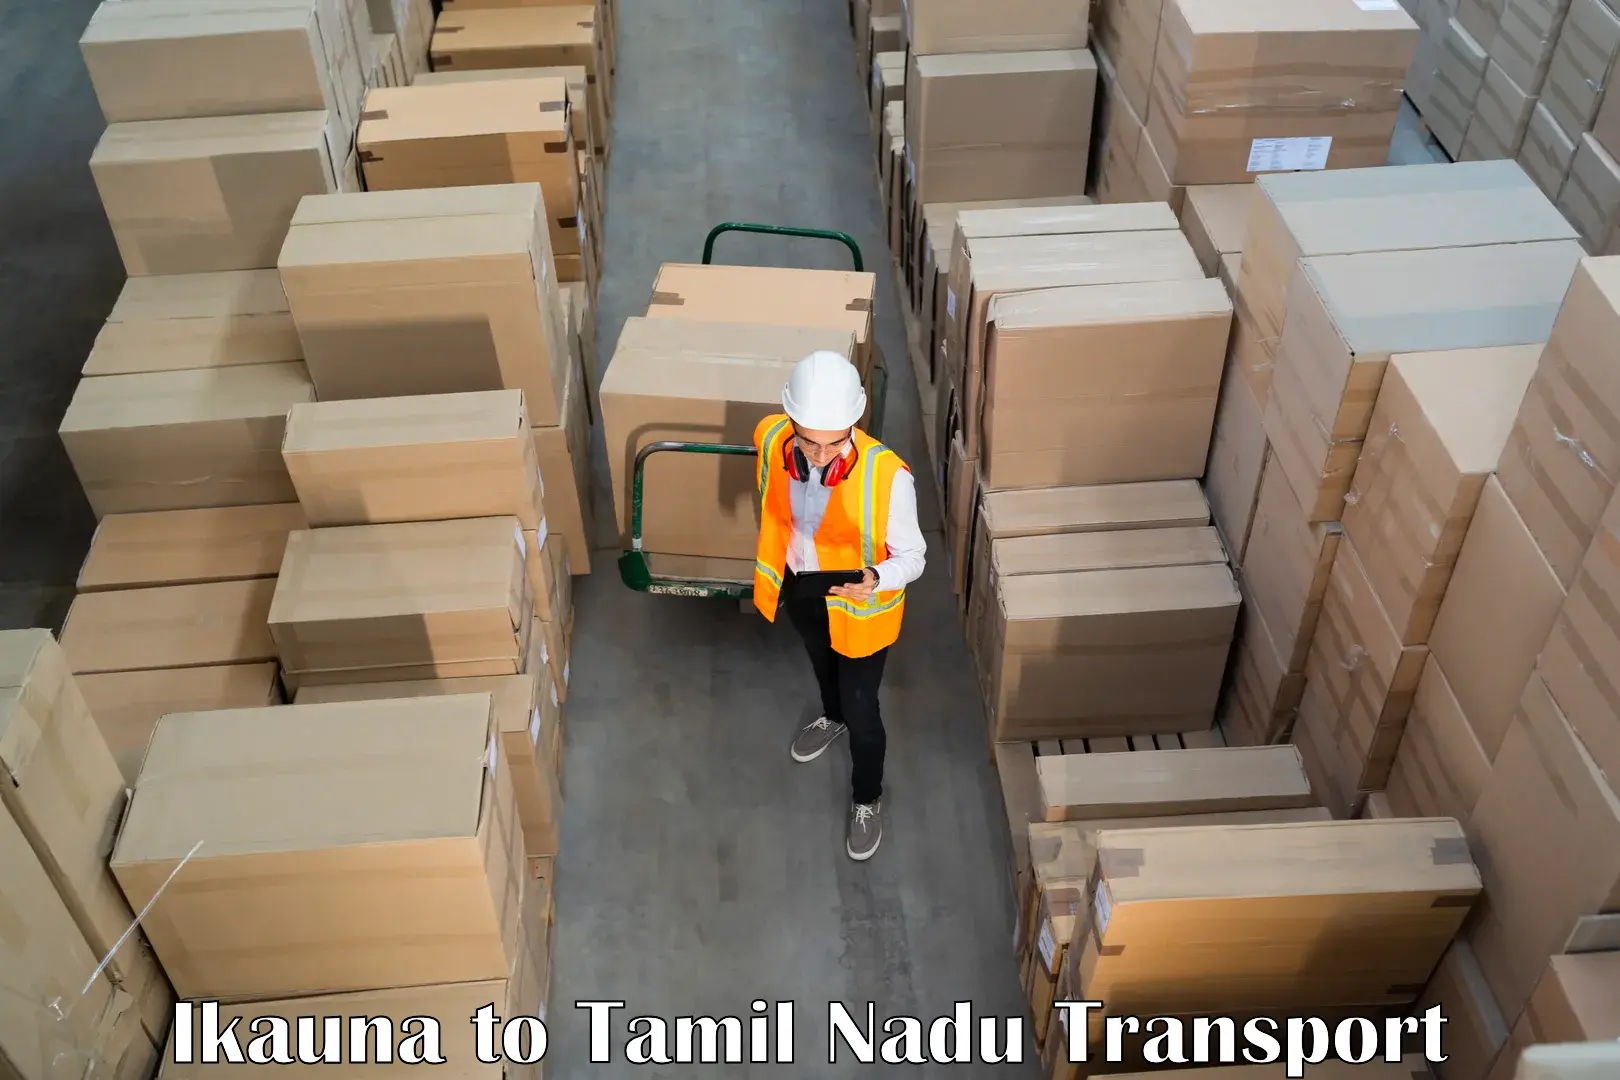 Goods delivery service Ikauna to Vellore